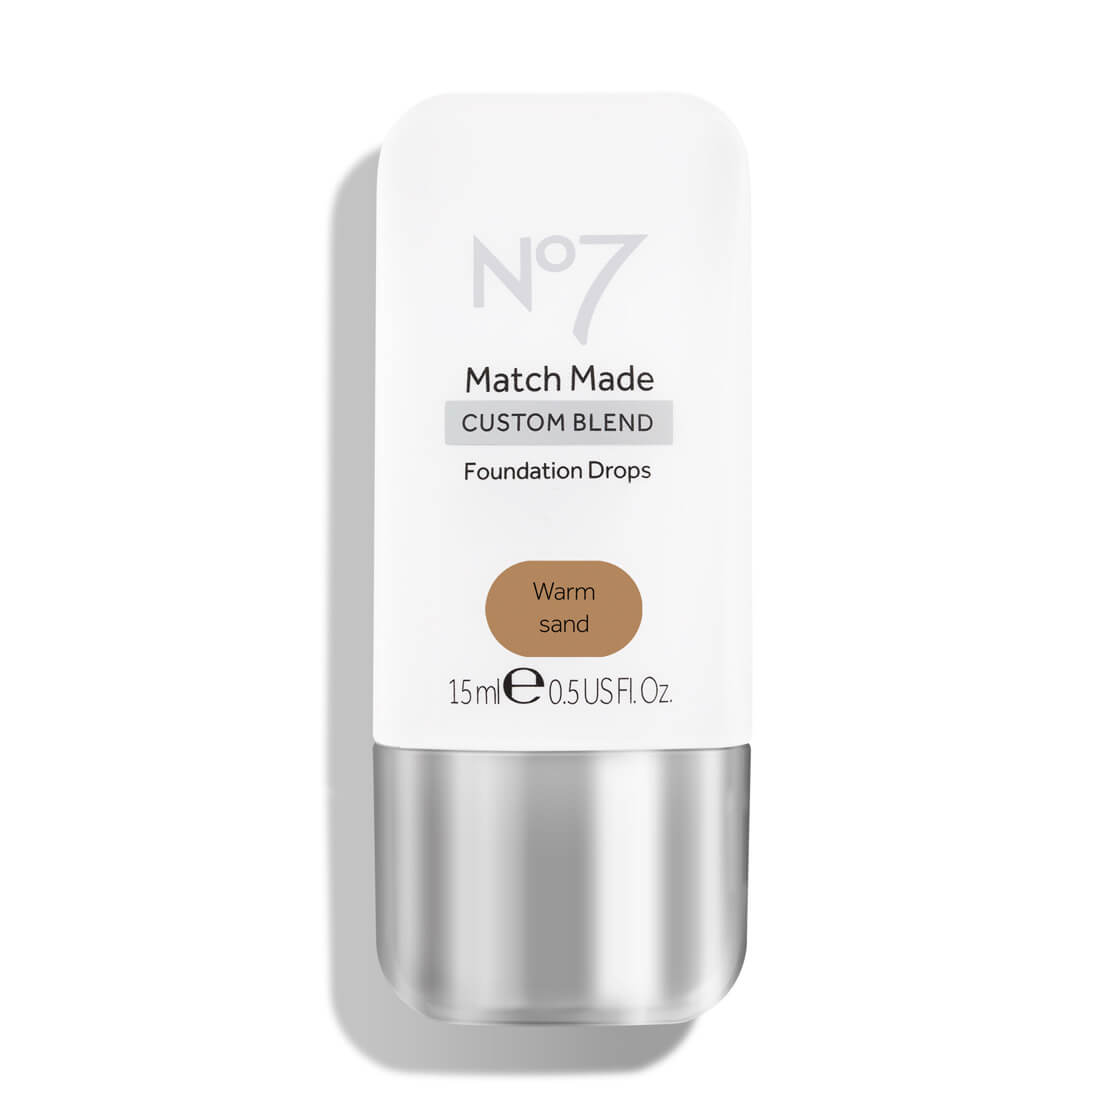 Match Made Foundation Drops (Various Shades) - 16 Warm Sand